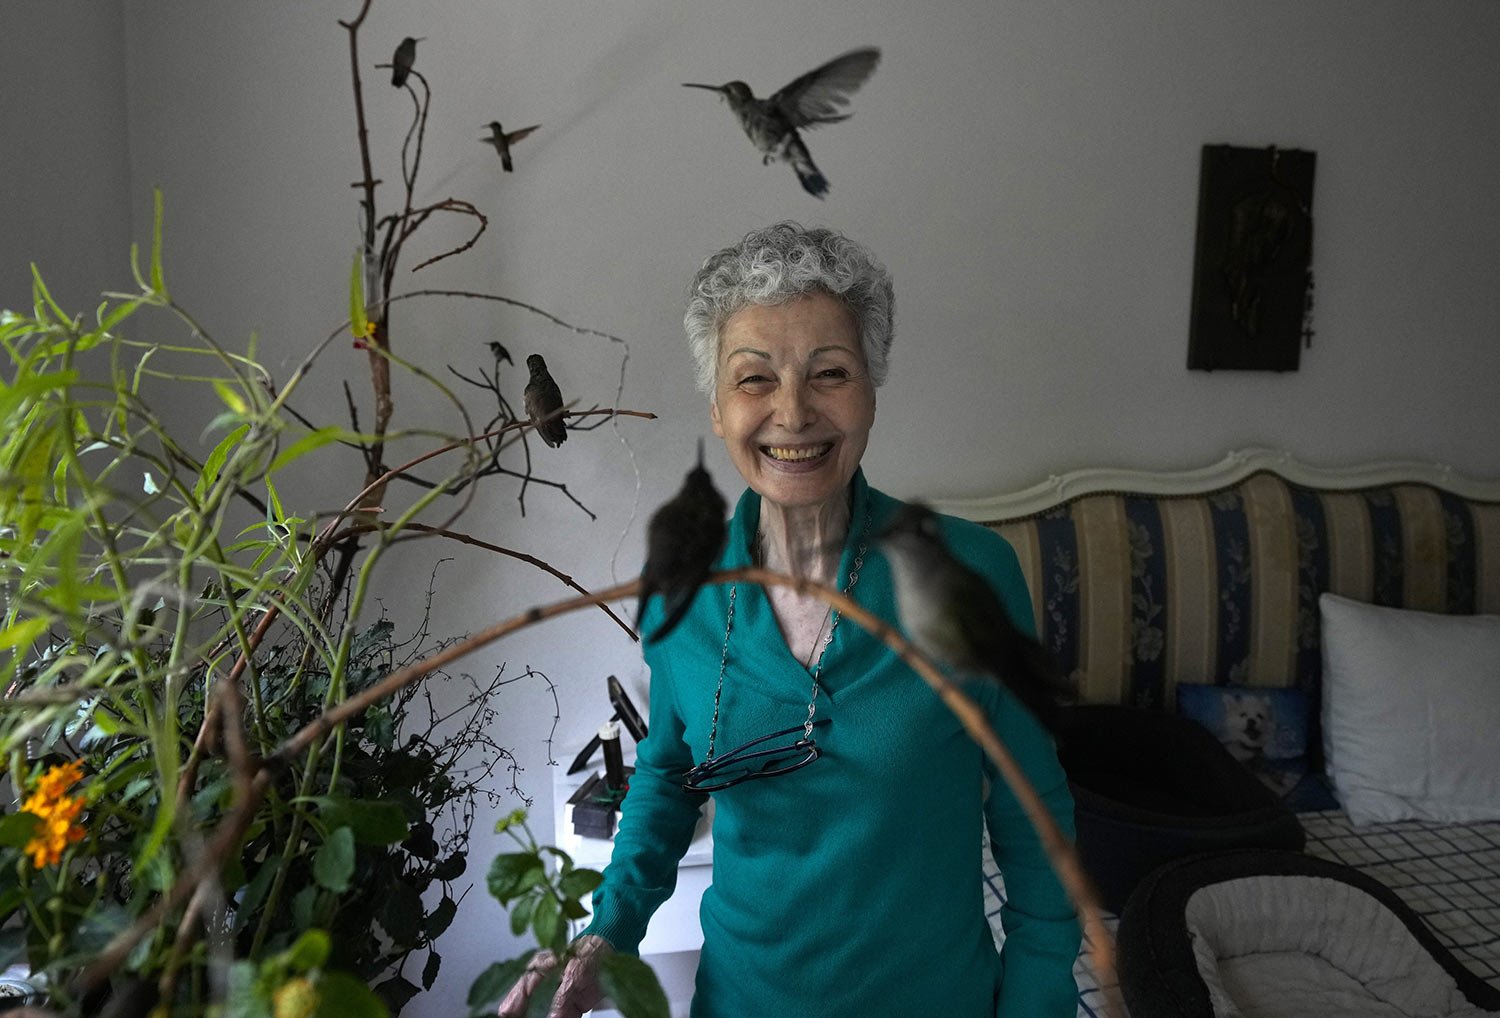  Catia Lattouf poses for a photo with hummingbirds in her care, at her apartment-turned makeshift clinic for the tiny birds in Mexico City, Aug. 7, 2023. Lattouf who has some 60 hummingbirds under her care, has become a reference source for bird love